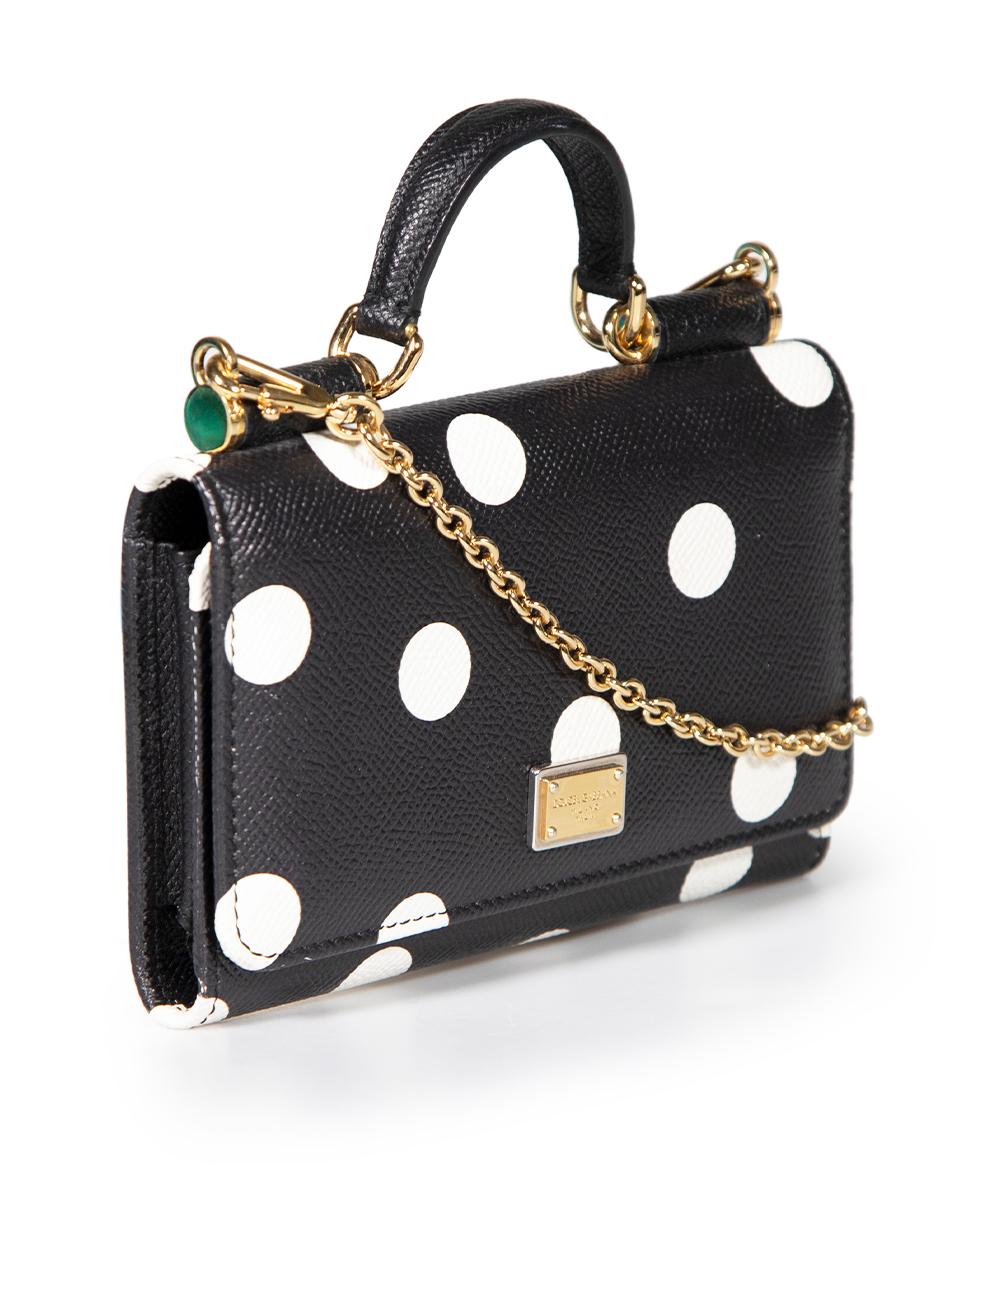 CONDITION is Very good. Minimal wear to bag is evident. Minimal wear to the front and back edging with white marks on this used Dolce & Gabbana designer resale item.
 
 
 
 Details
 
 
 Sicily Von
 
 Black
 
 Leather
 
 Wallet on chain
 
 Polkadot